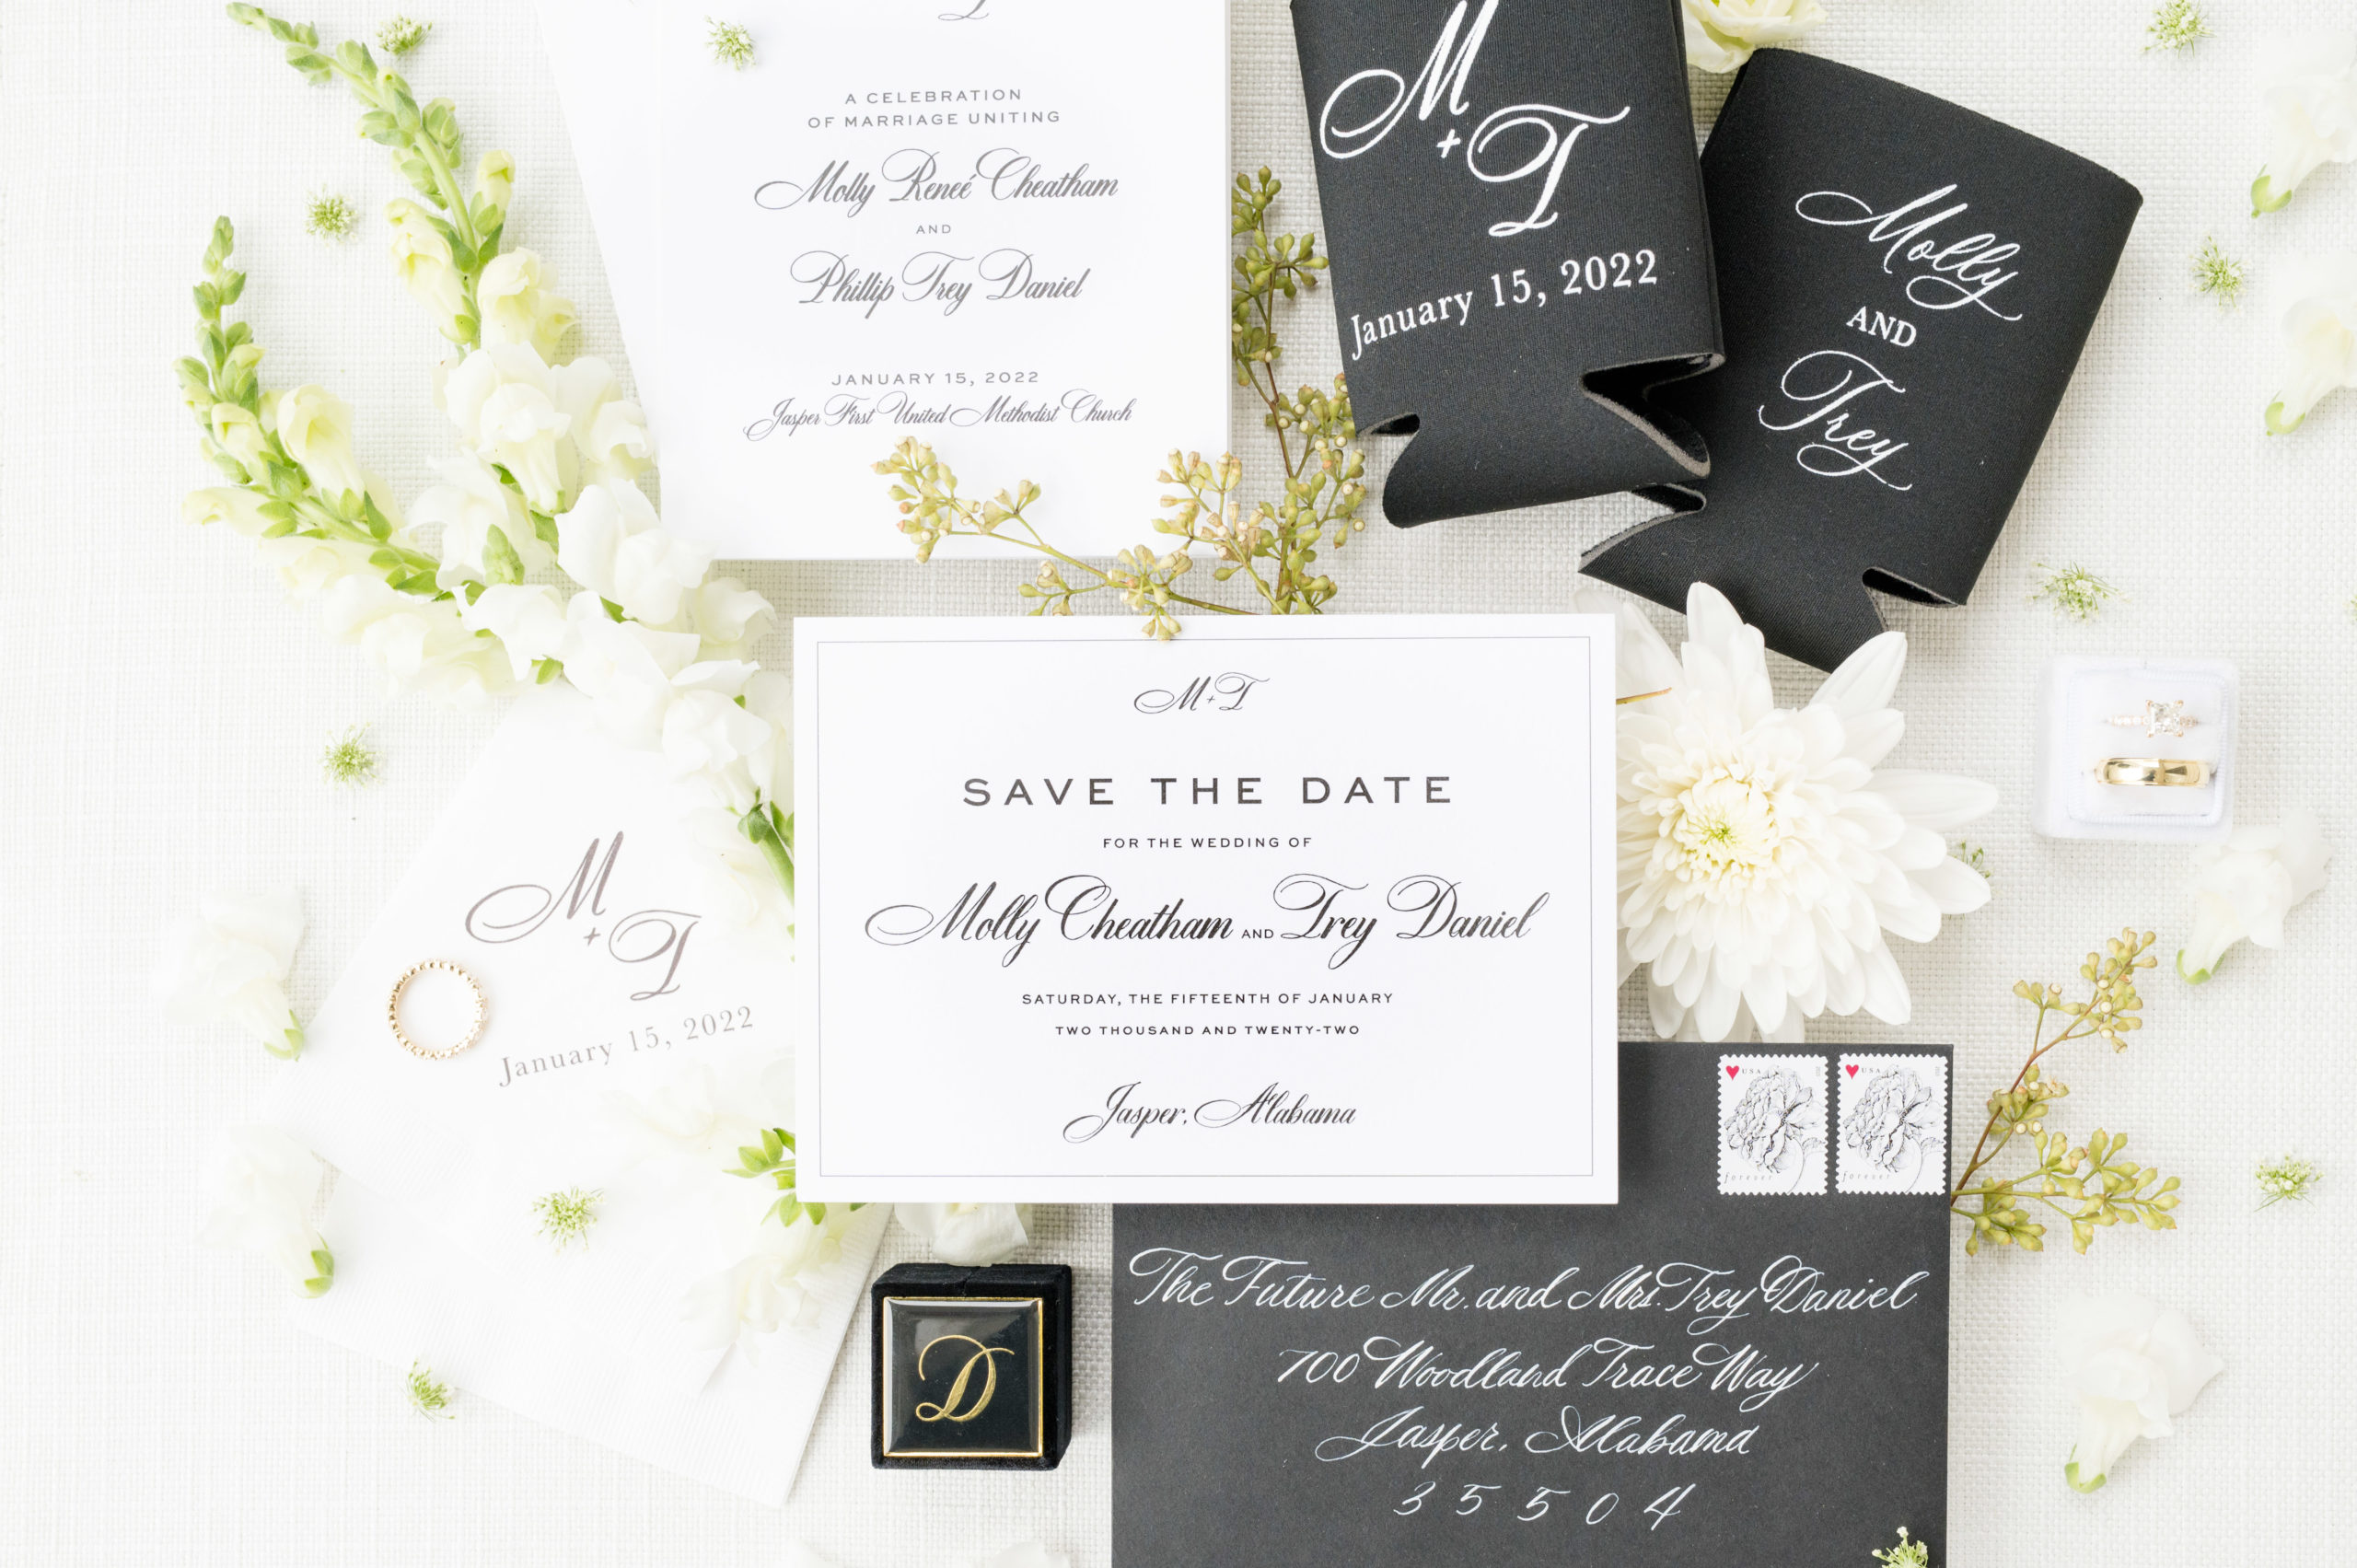 Save the date card and other ceremony details.